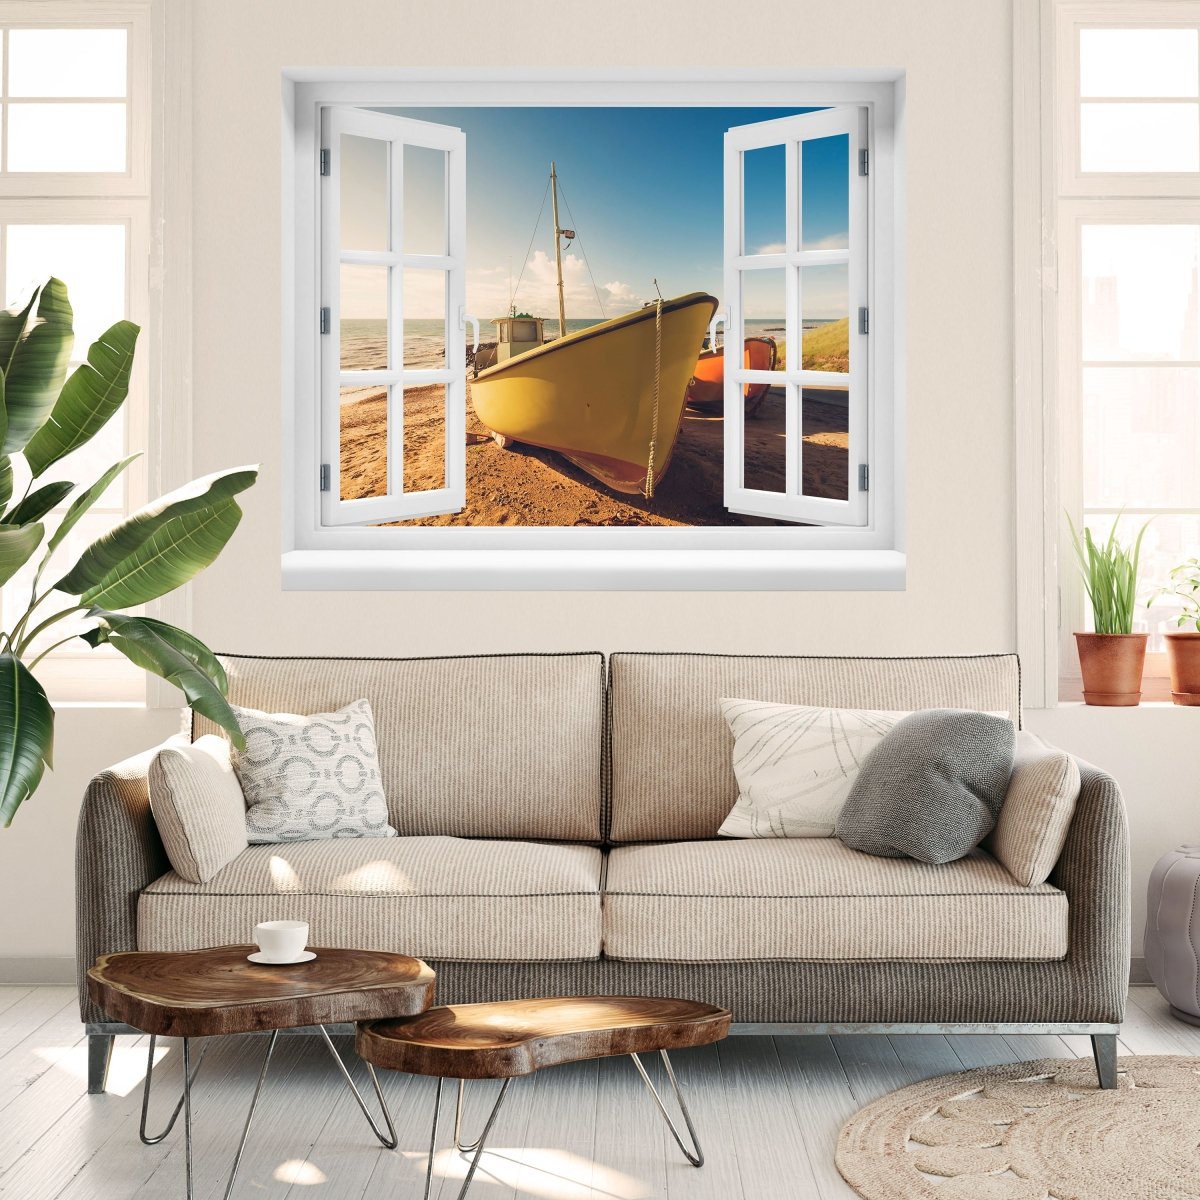 3D Wall Sticker Boats On The Beach - Wall Decal M0388